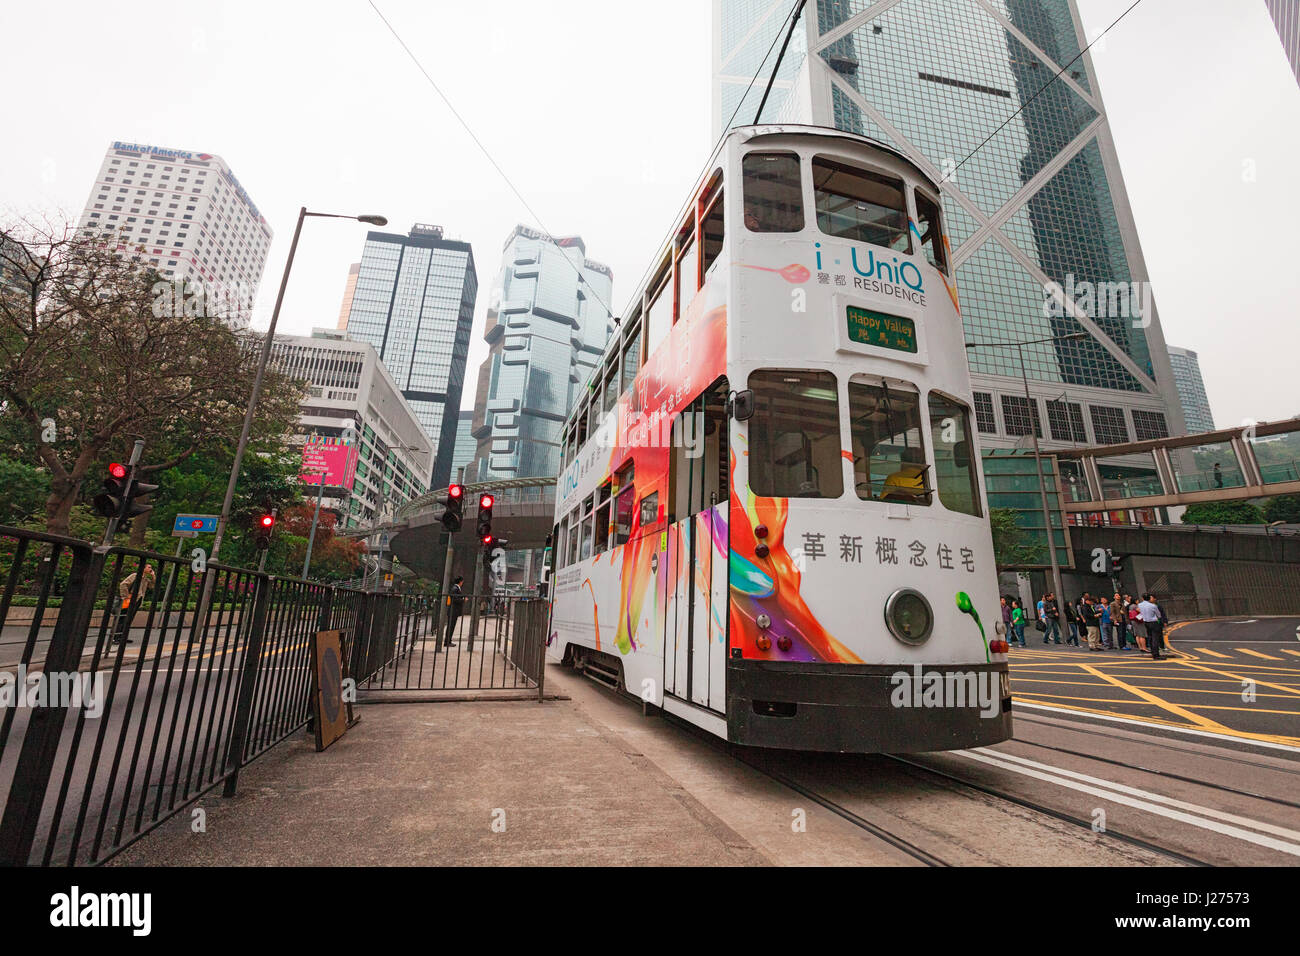 HONG KONG, APRIL 4, 2011 - Double-deck tram in front of skyscrapes. Wide angle shot. Stock Photo